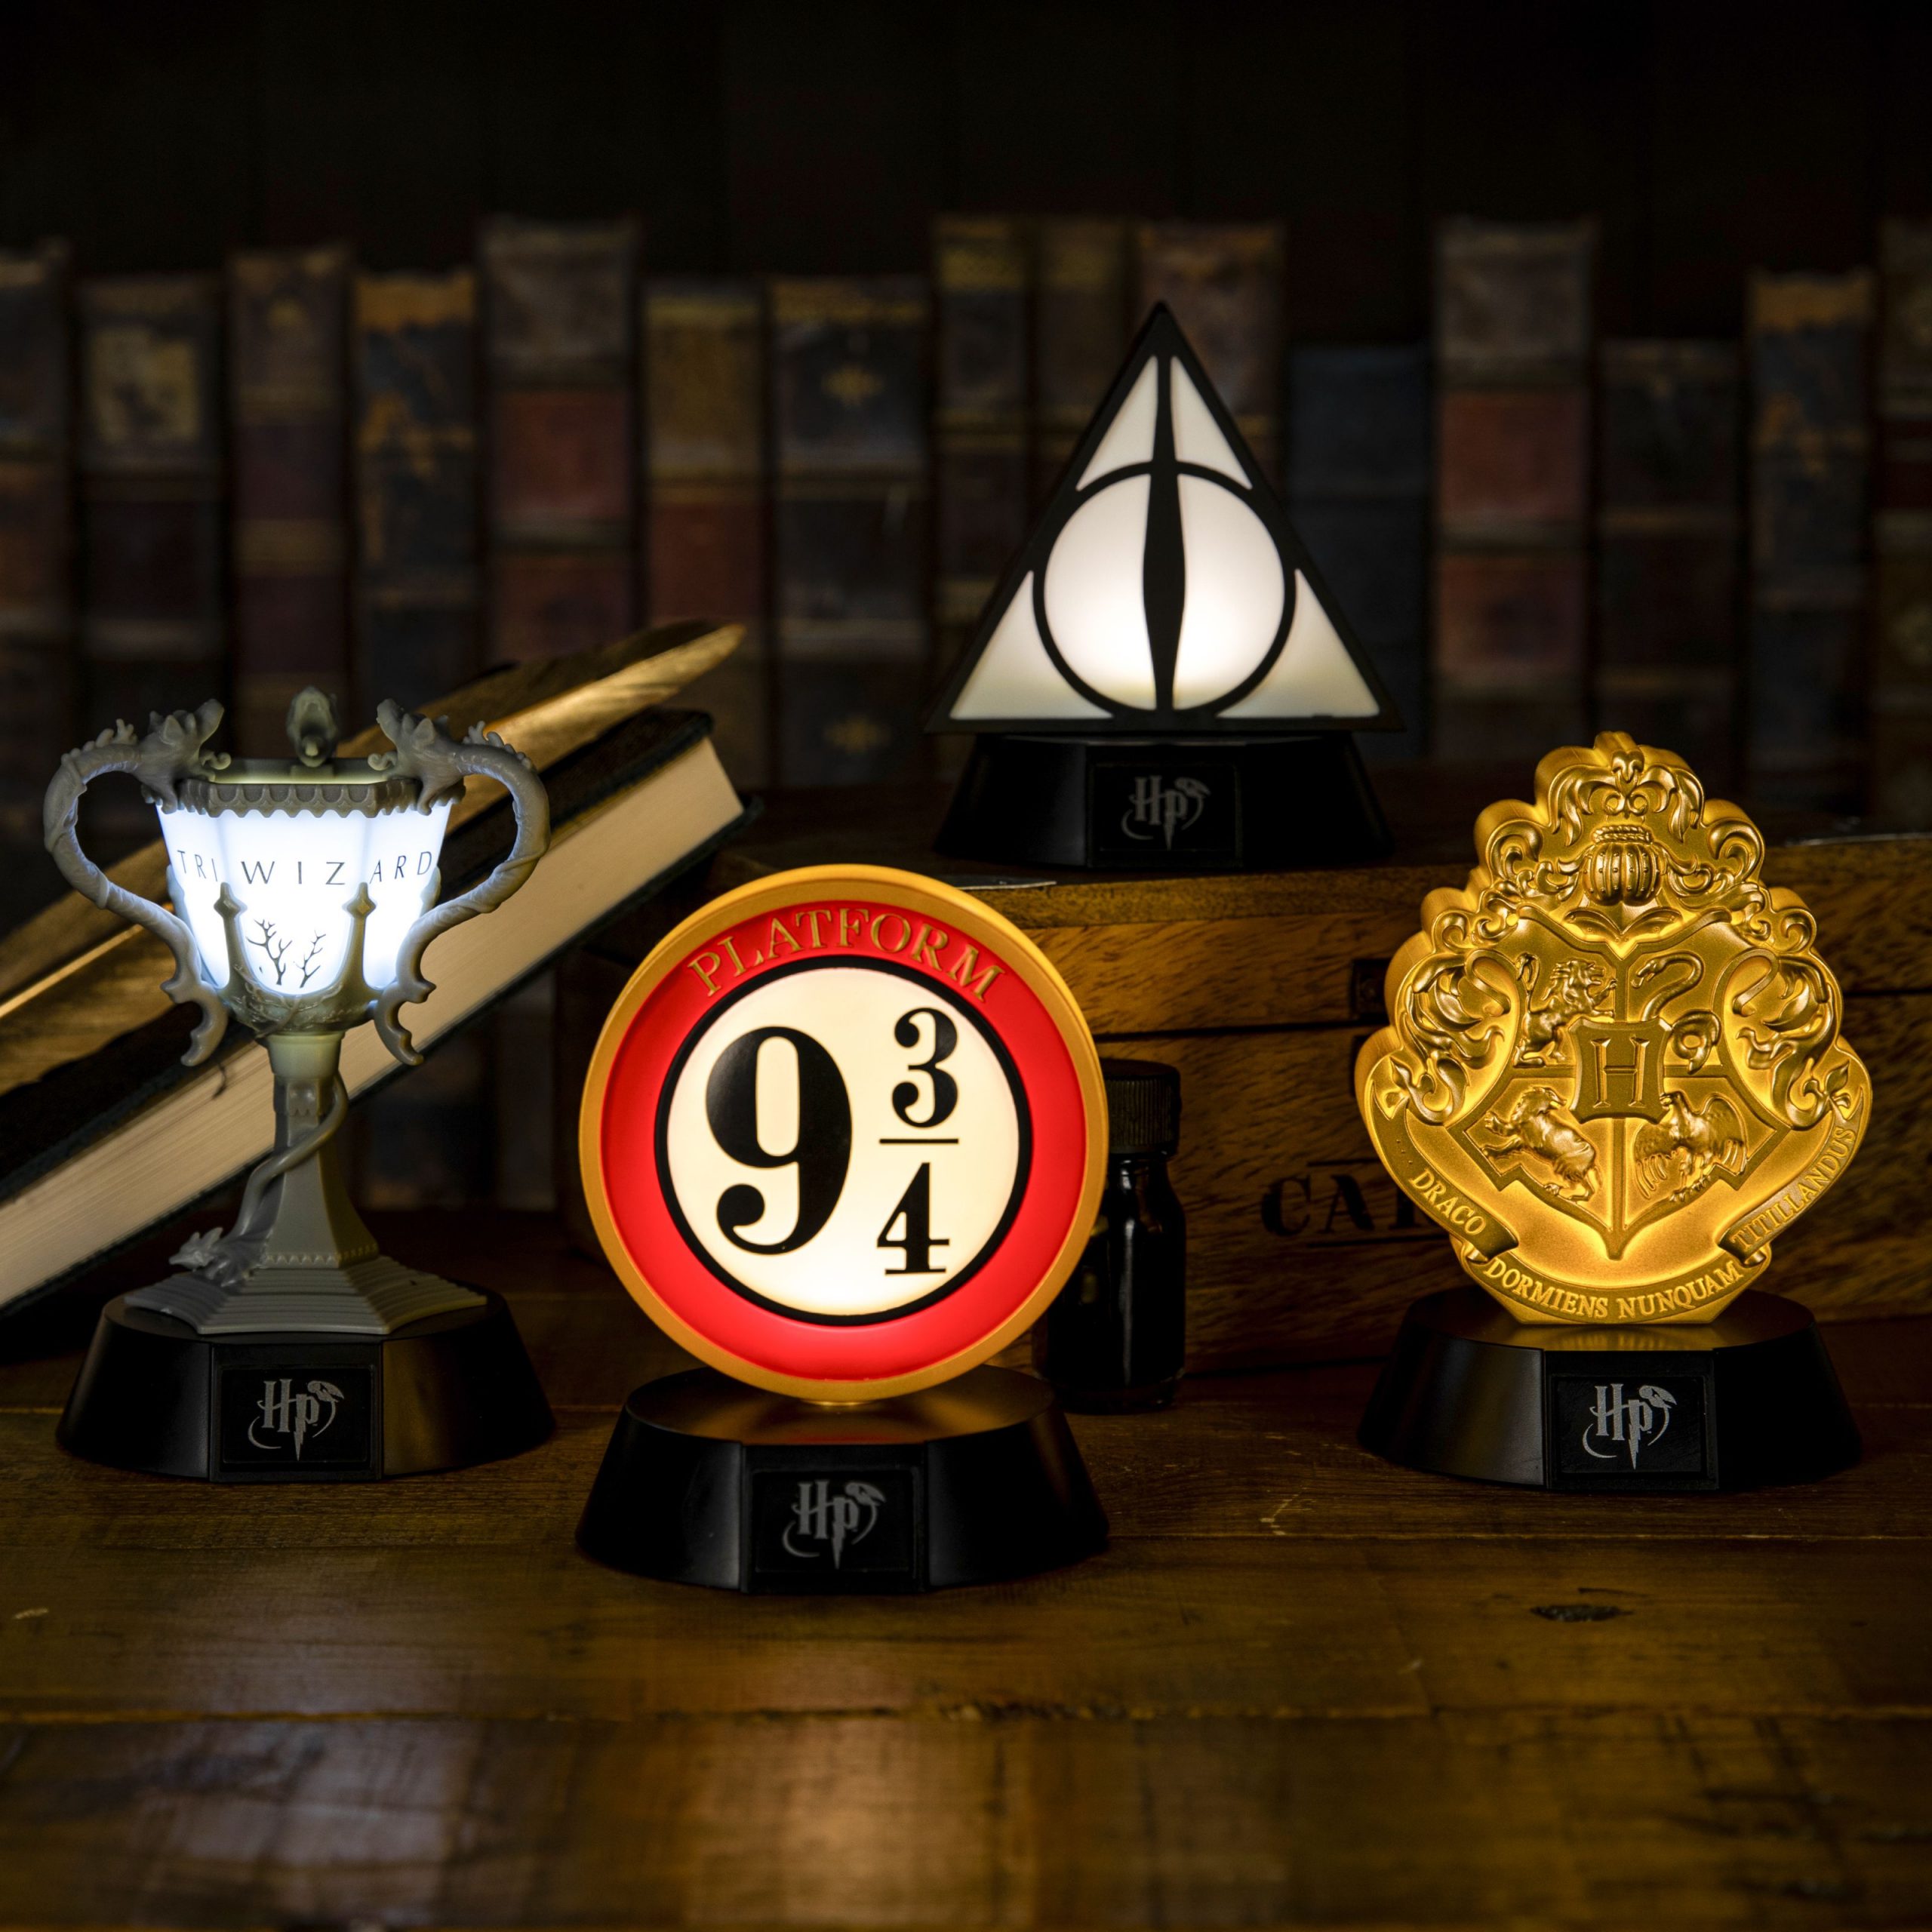 Paladone Harry Potter Triwizard Cup Icon Light BDP PP5956HP - PALADONE